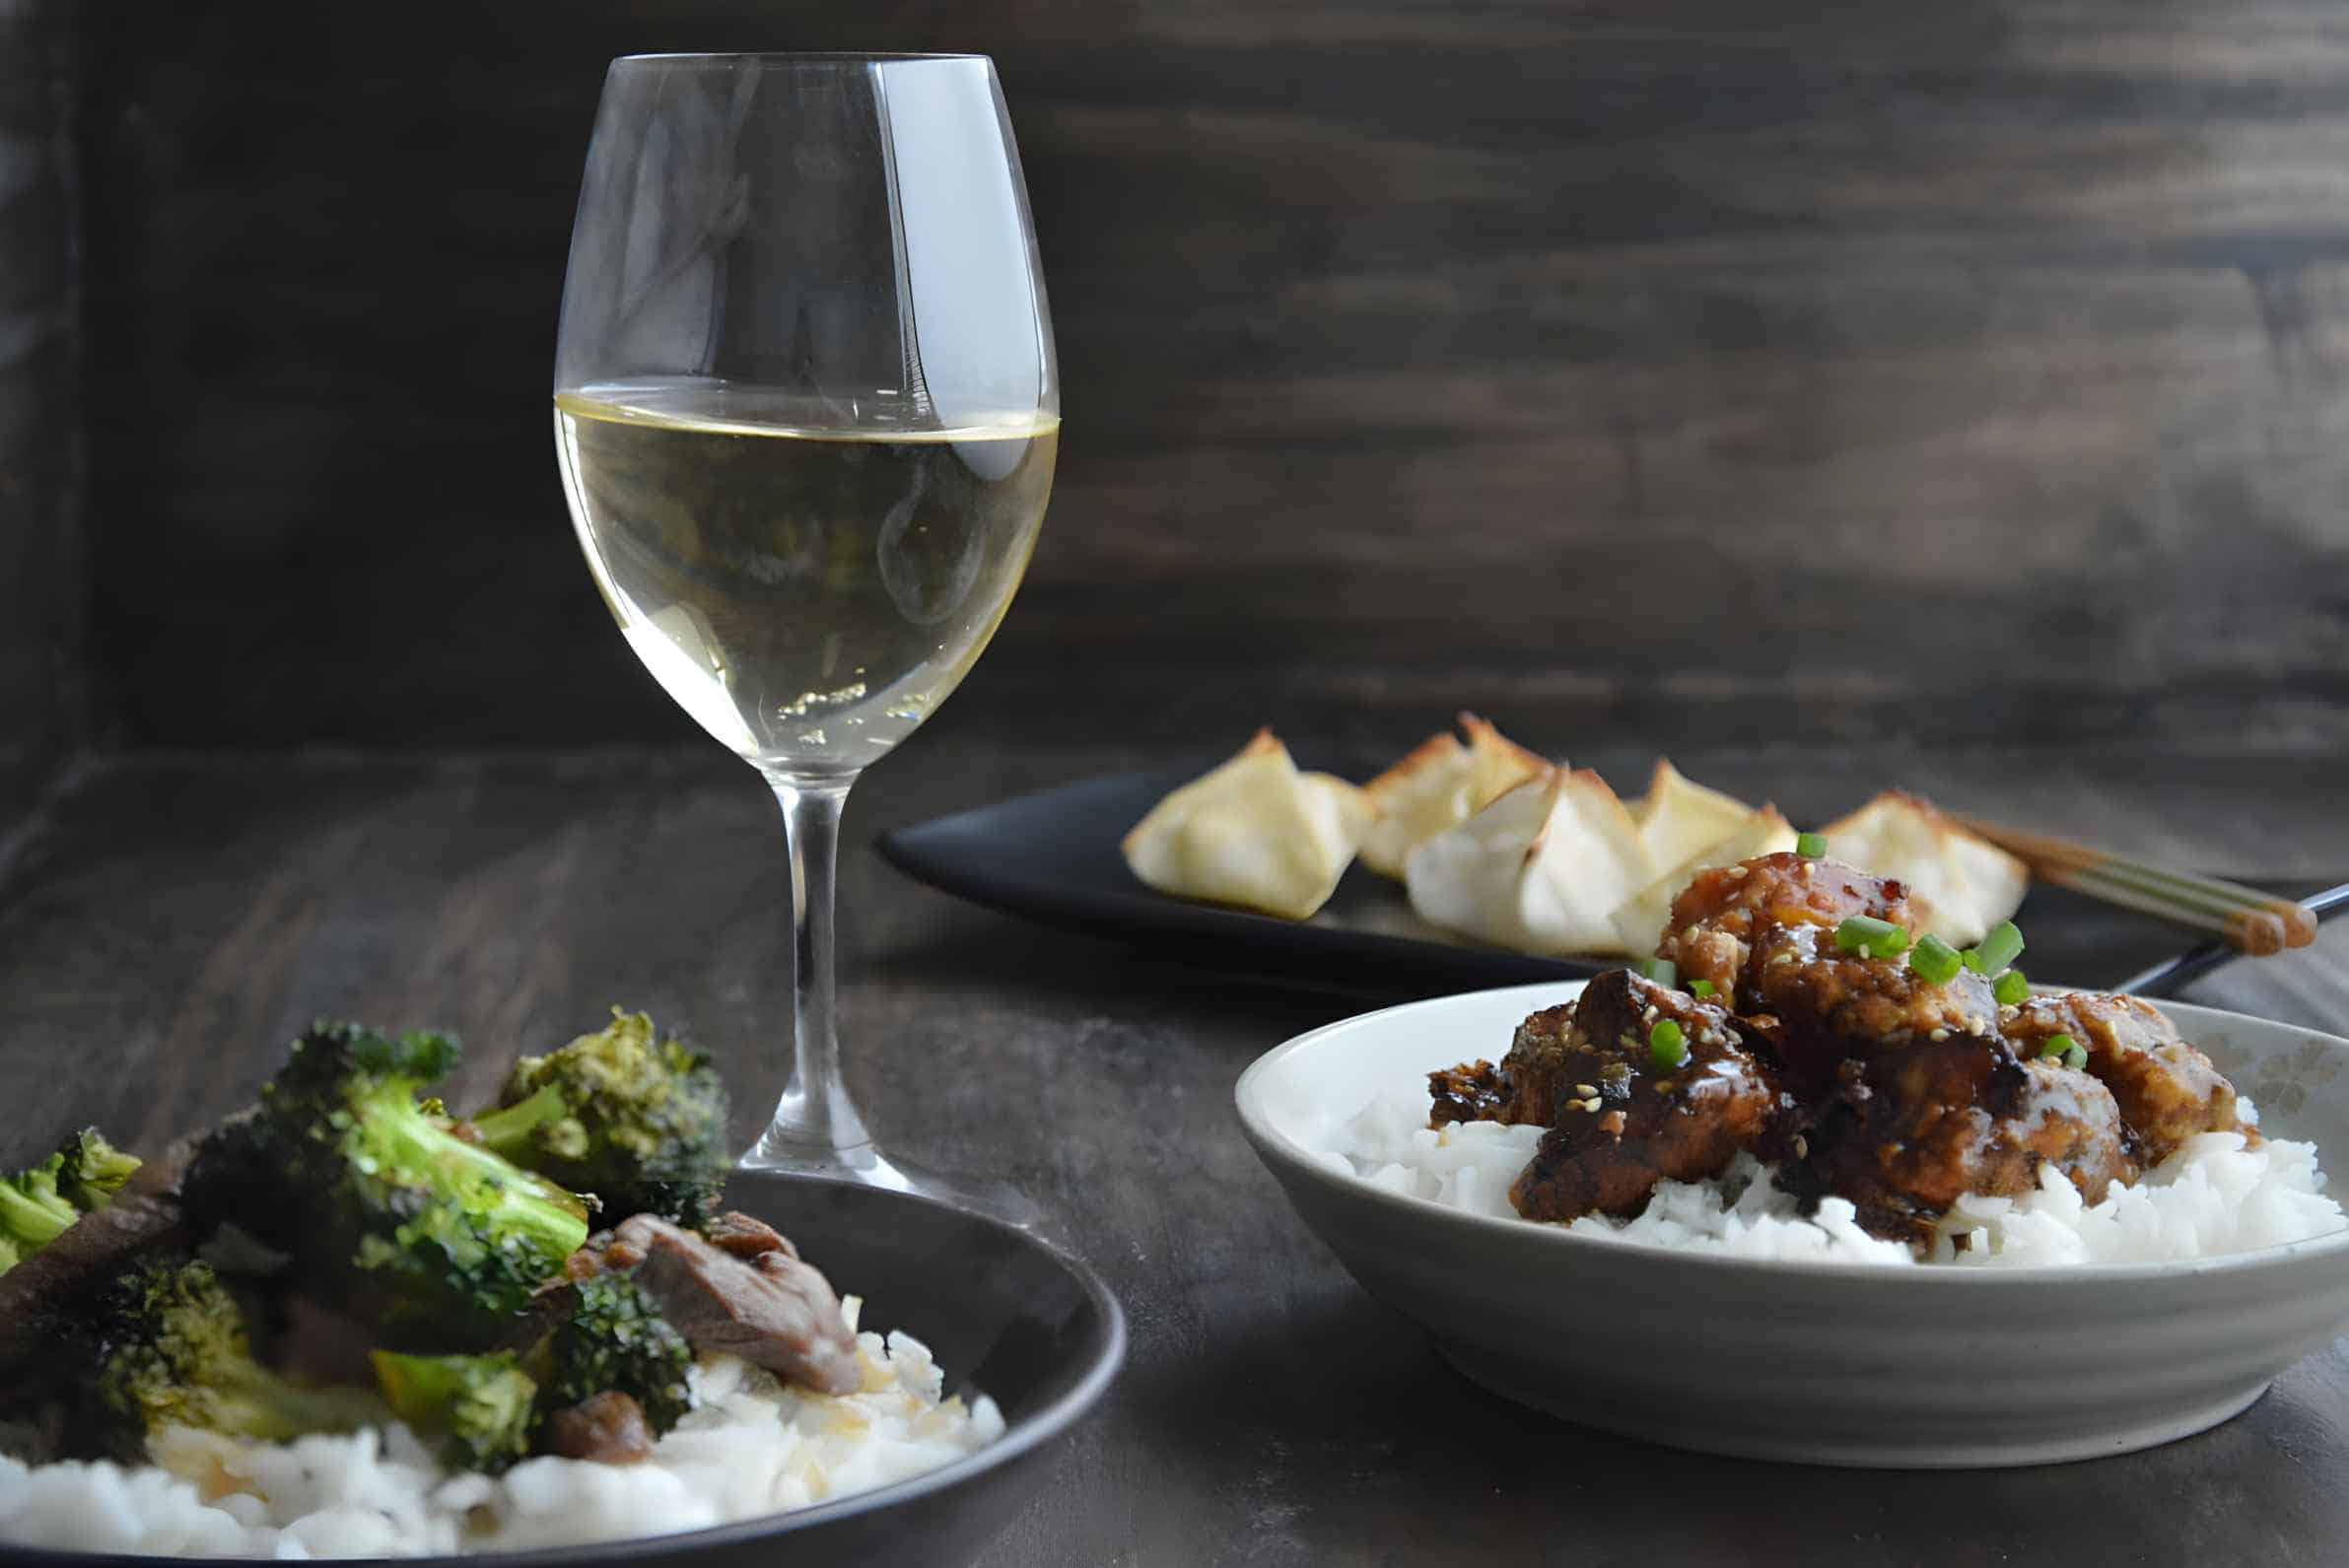 Other Wines to Check Out and Pair with Chinese Cuisine